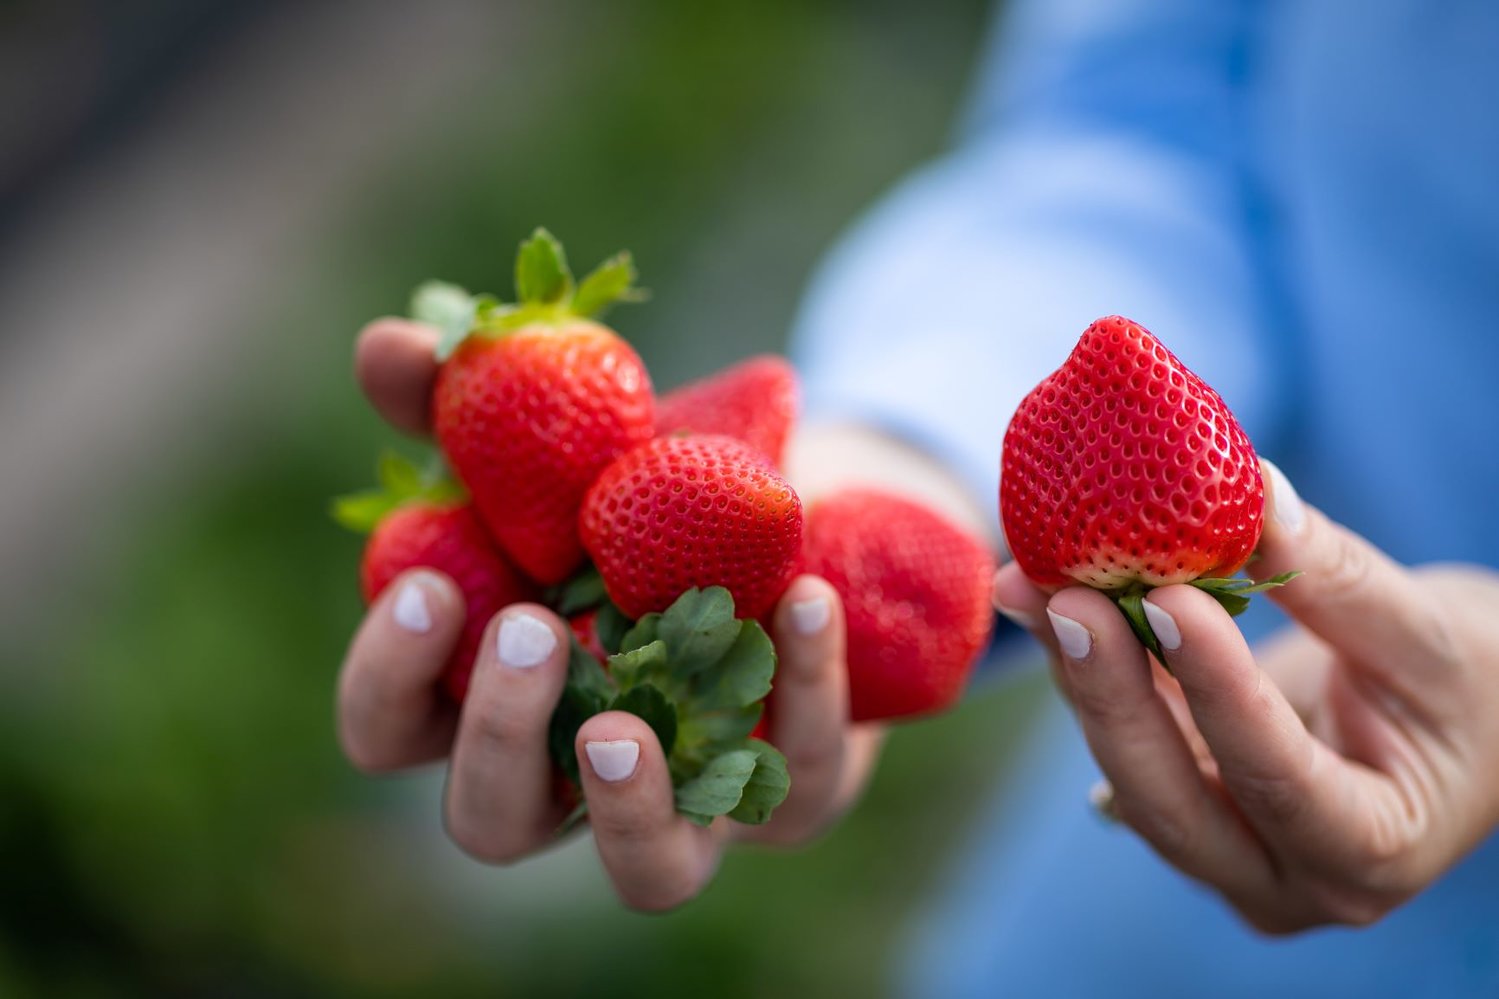 That’s no accident. Strawberries are in season, and those you see at the grocery store should be shipped and stocked at the right temperature, says a University of Florida scientist.